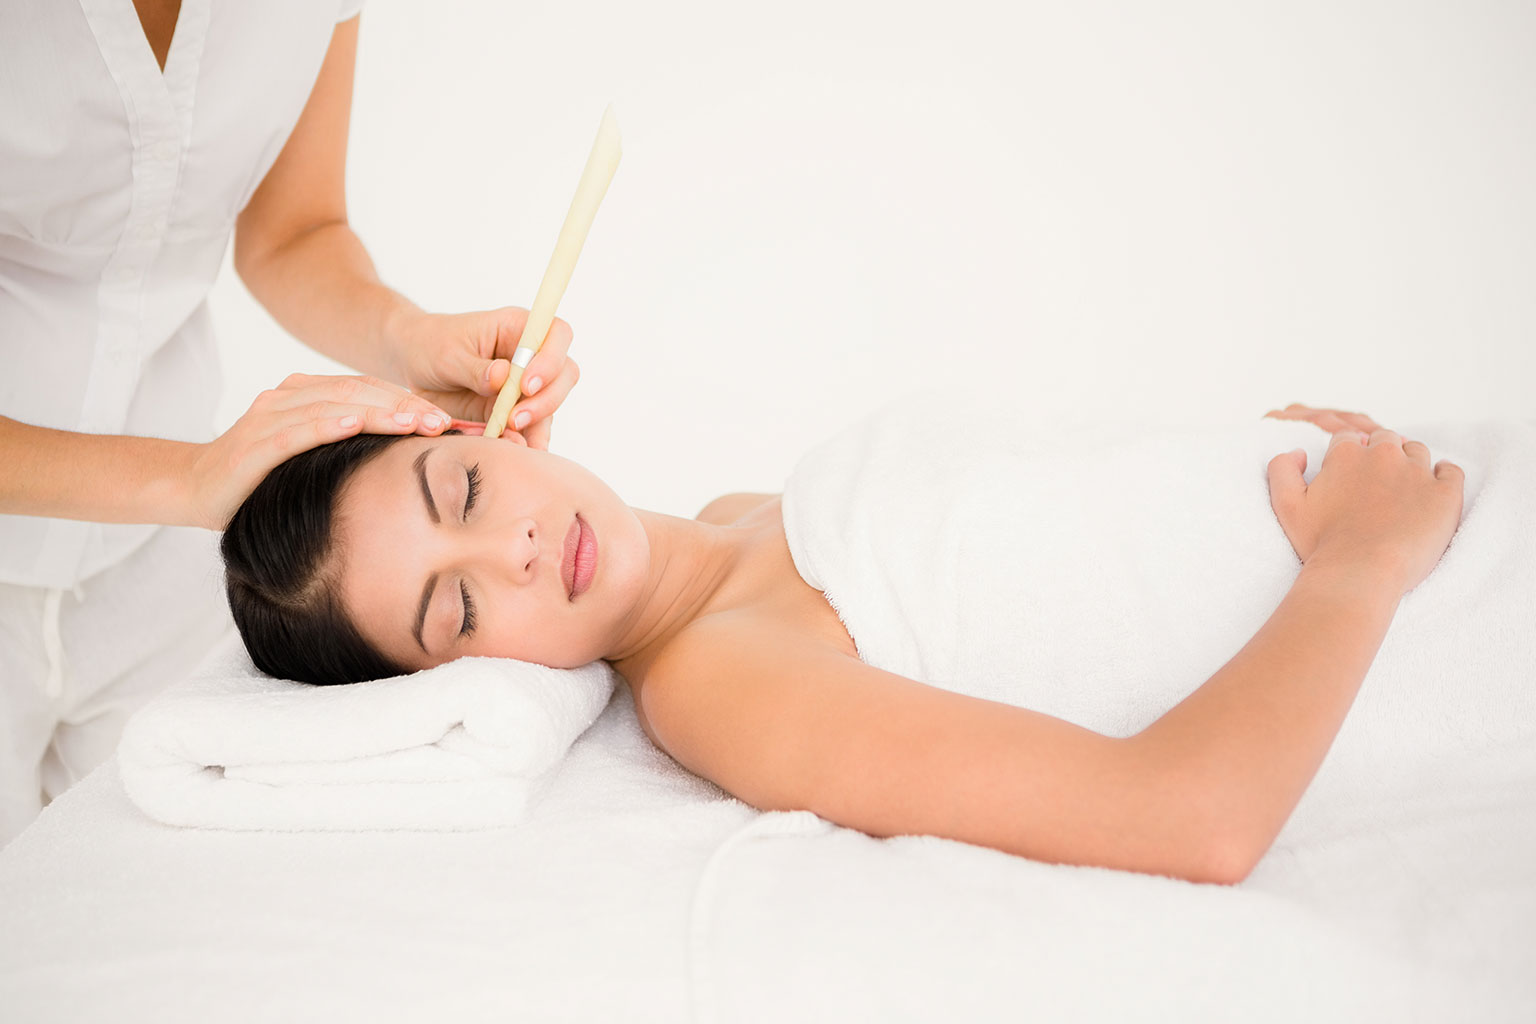 Candle Ear Waxing: Is It Safe and Effective?